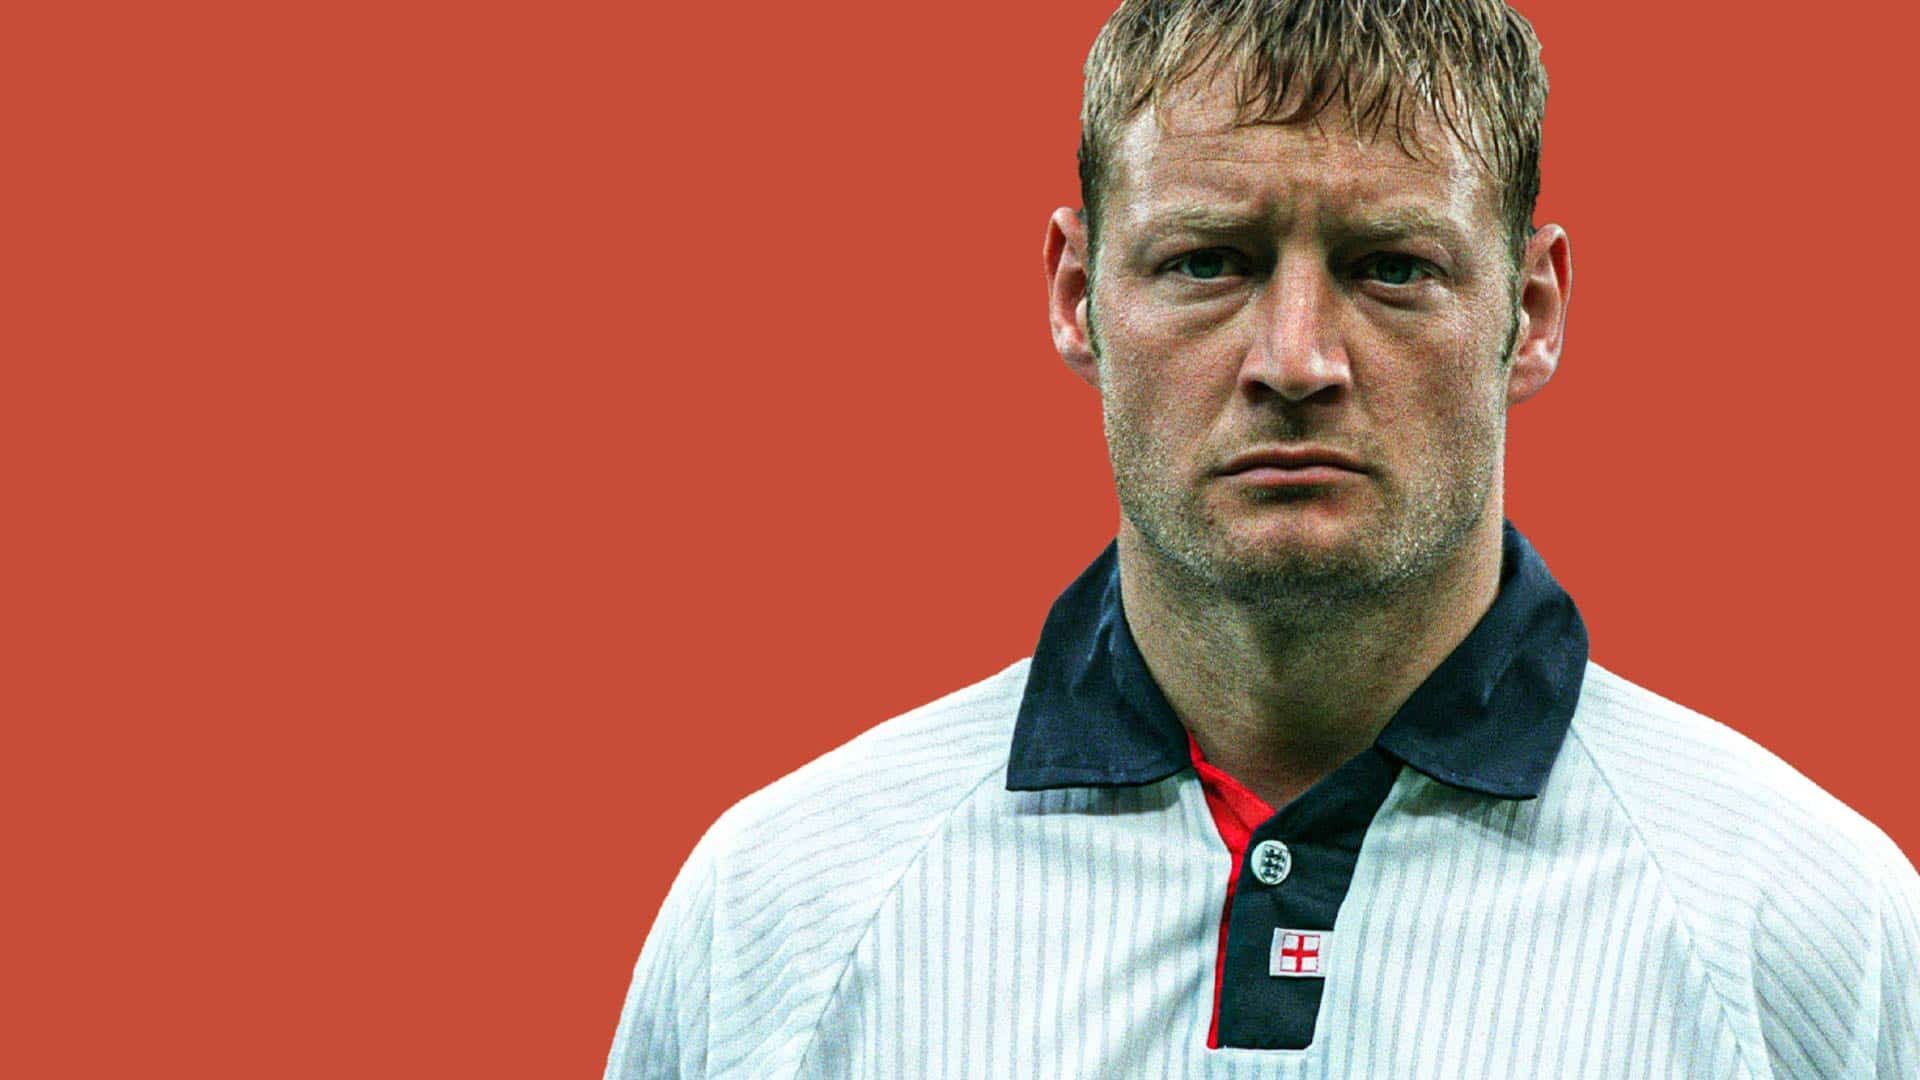 David Batty, with a very unimpressed David Batty expression on his face, lining up for England at the 1998 World Cup